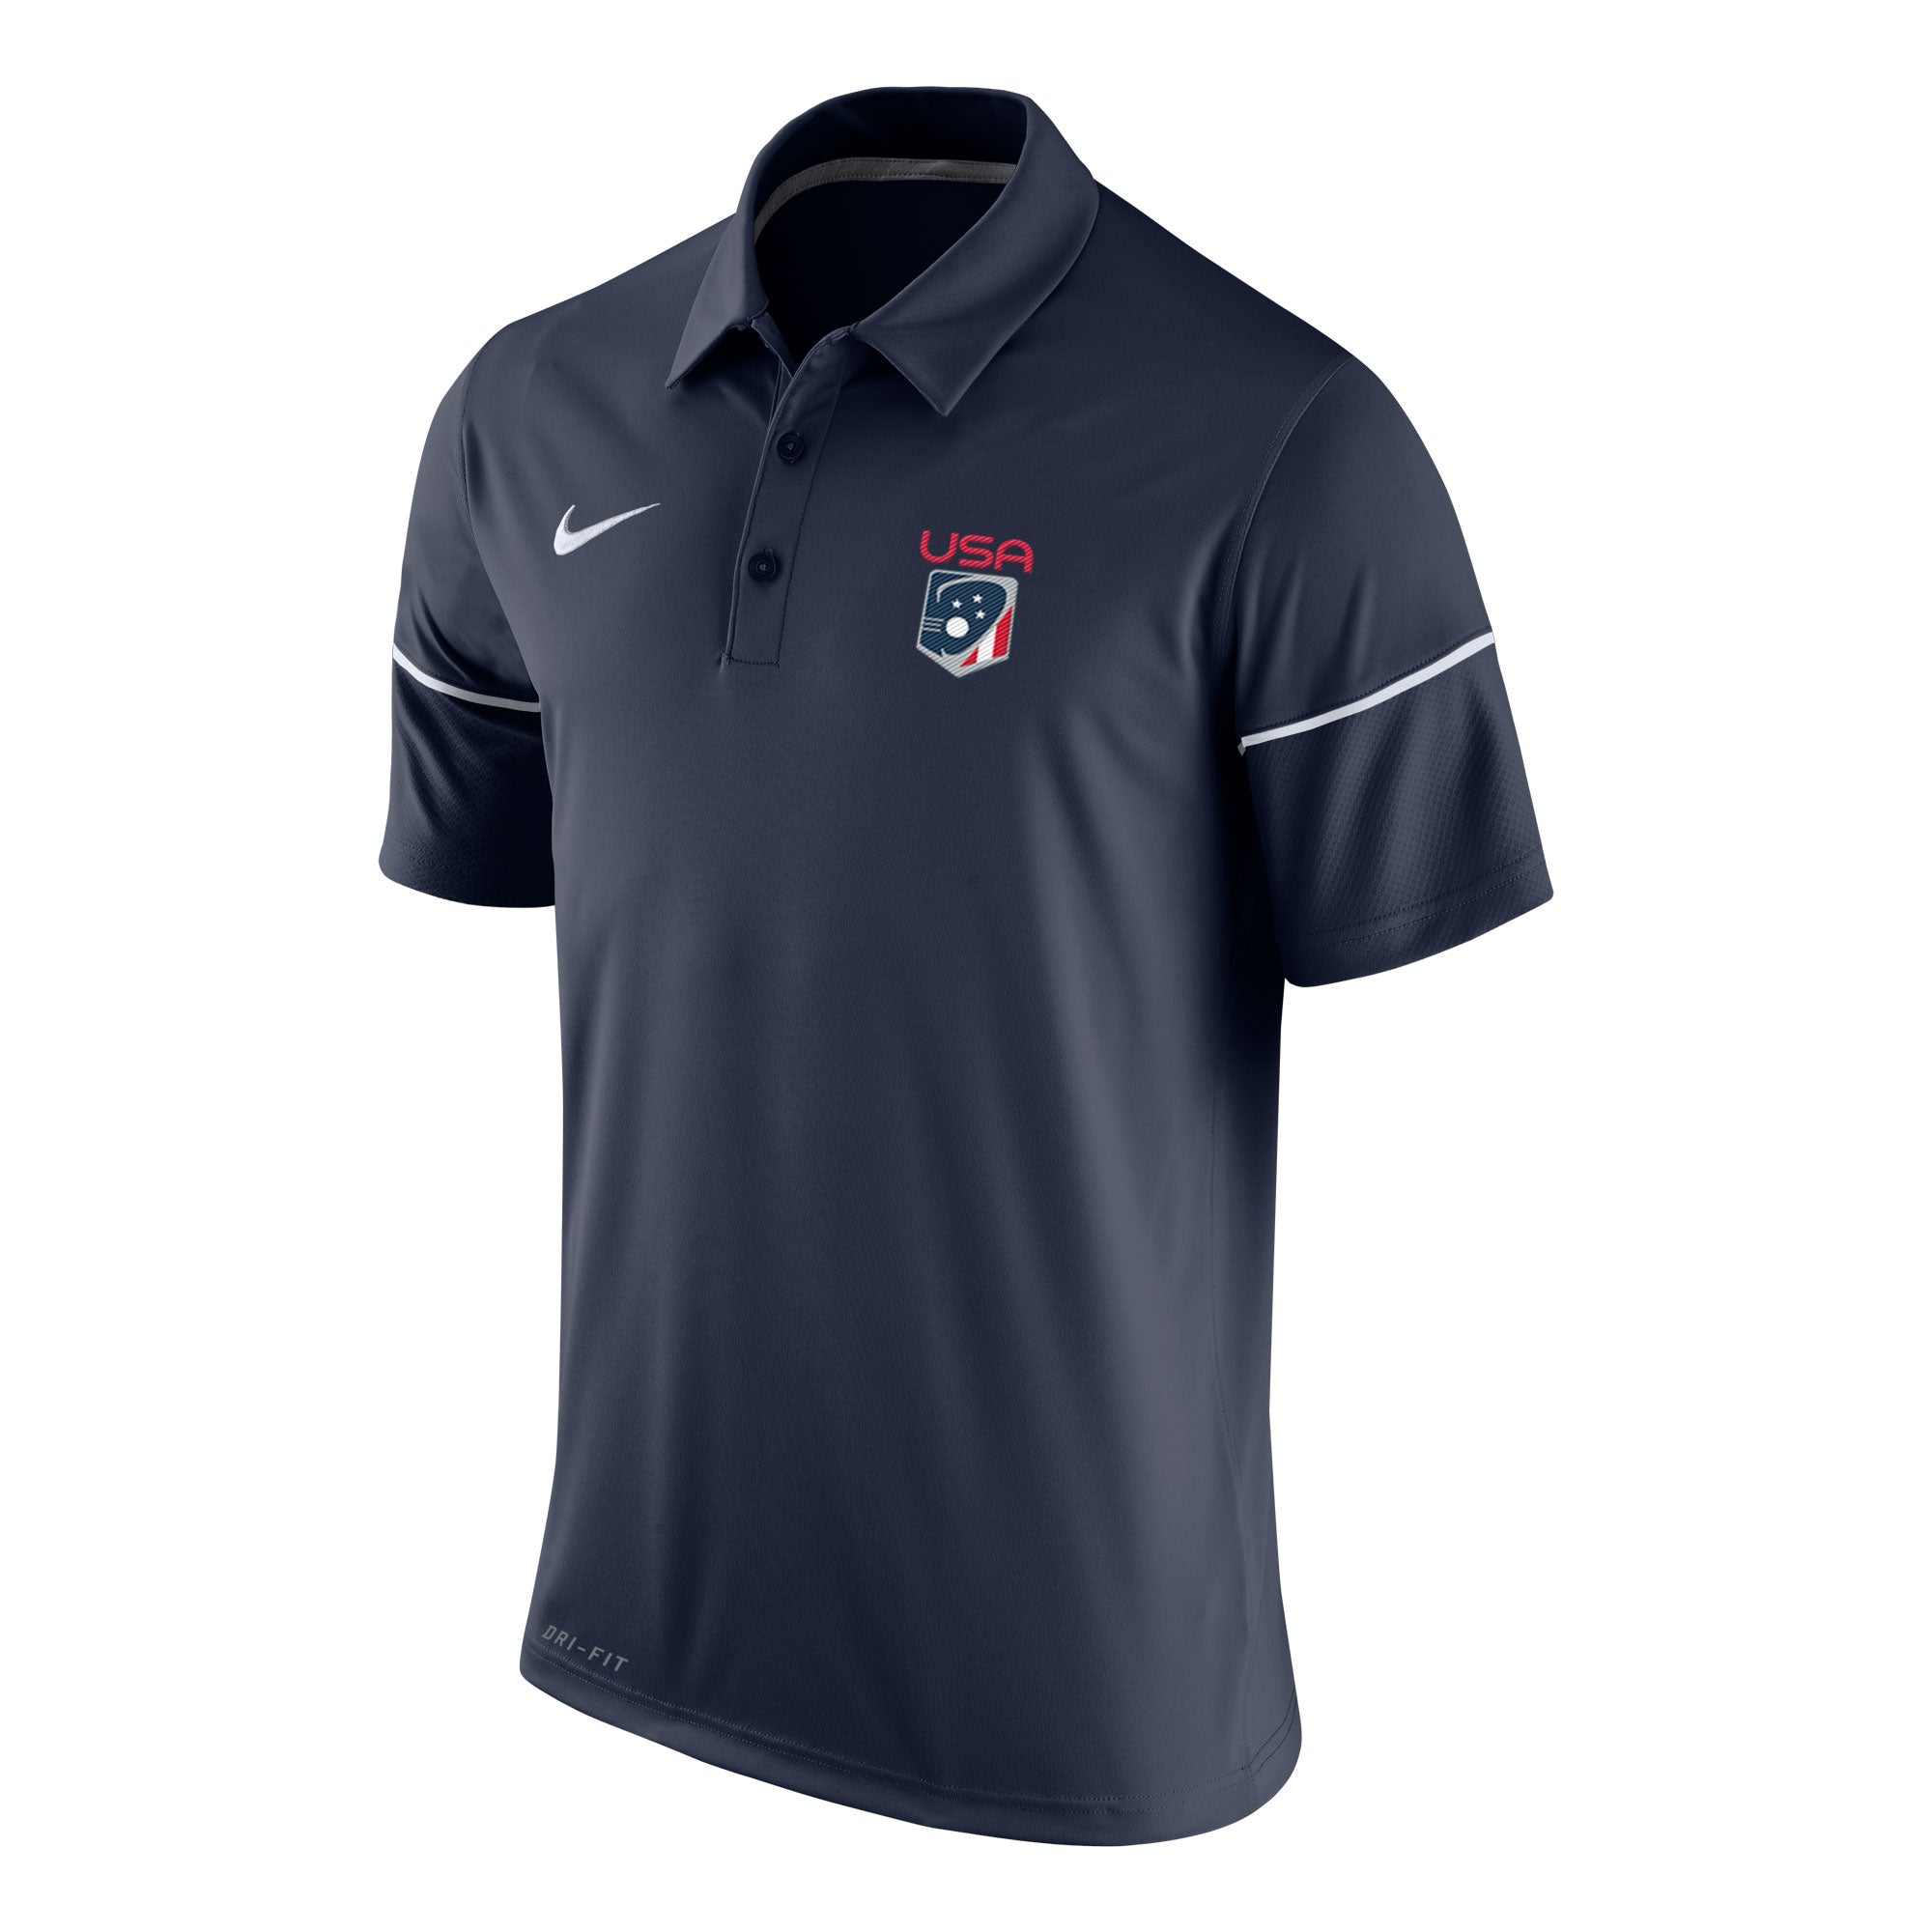 FINAL SALE- Men's Nike Team Issue Polo